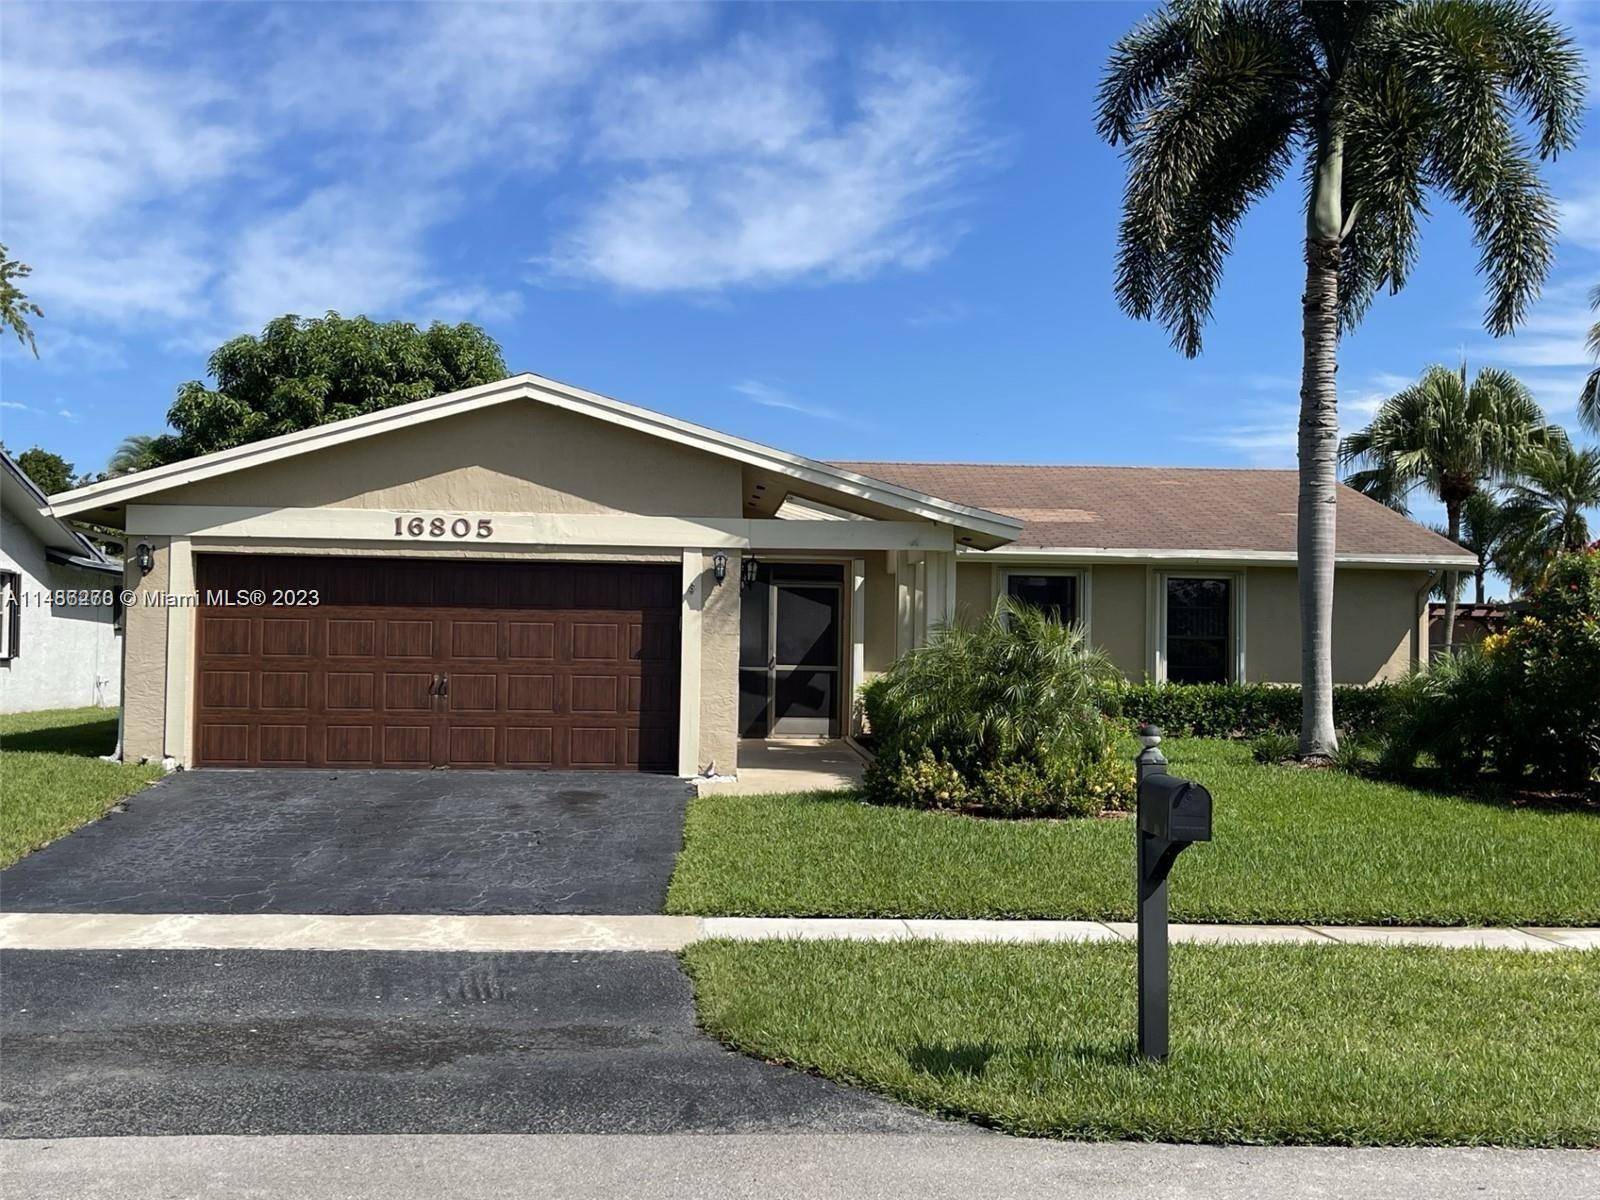 BEAUTIFUL 3 BEDROOMS 2 BATHS ONE STORY HOME LOCATED IN THE DESIRABLE CITY OF WESTON.